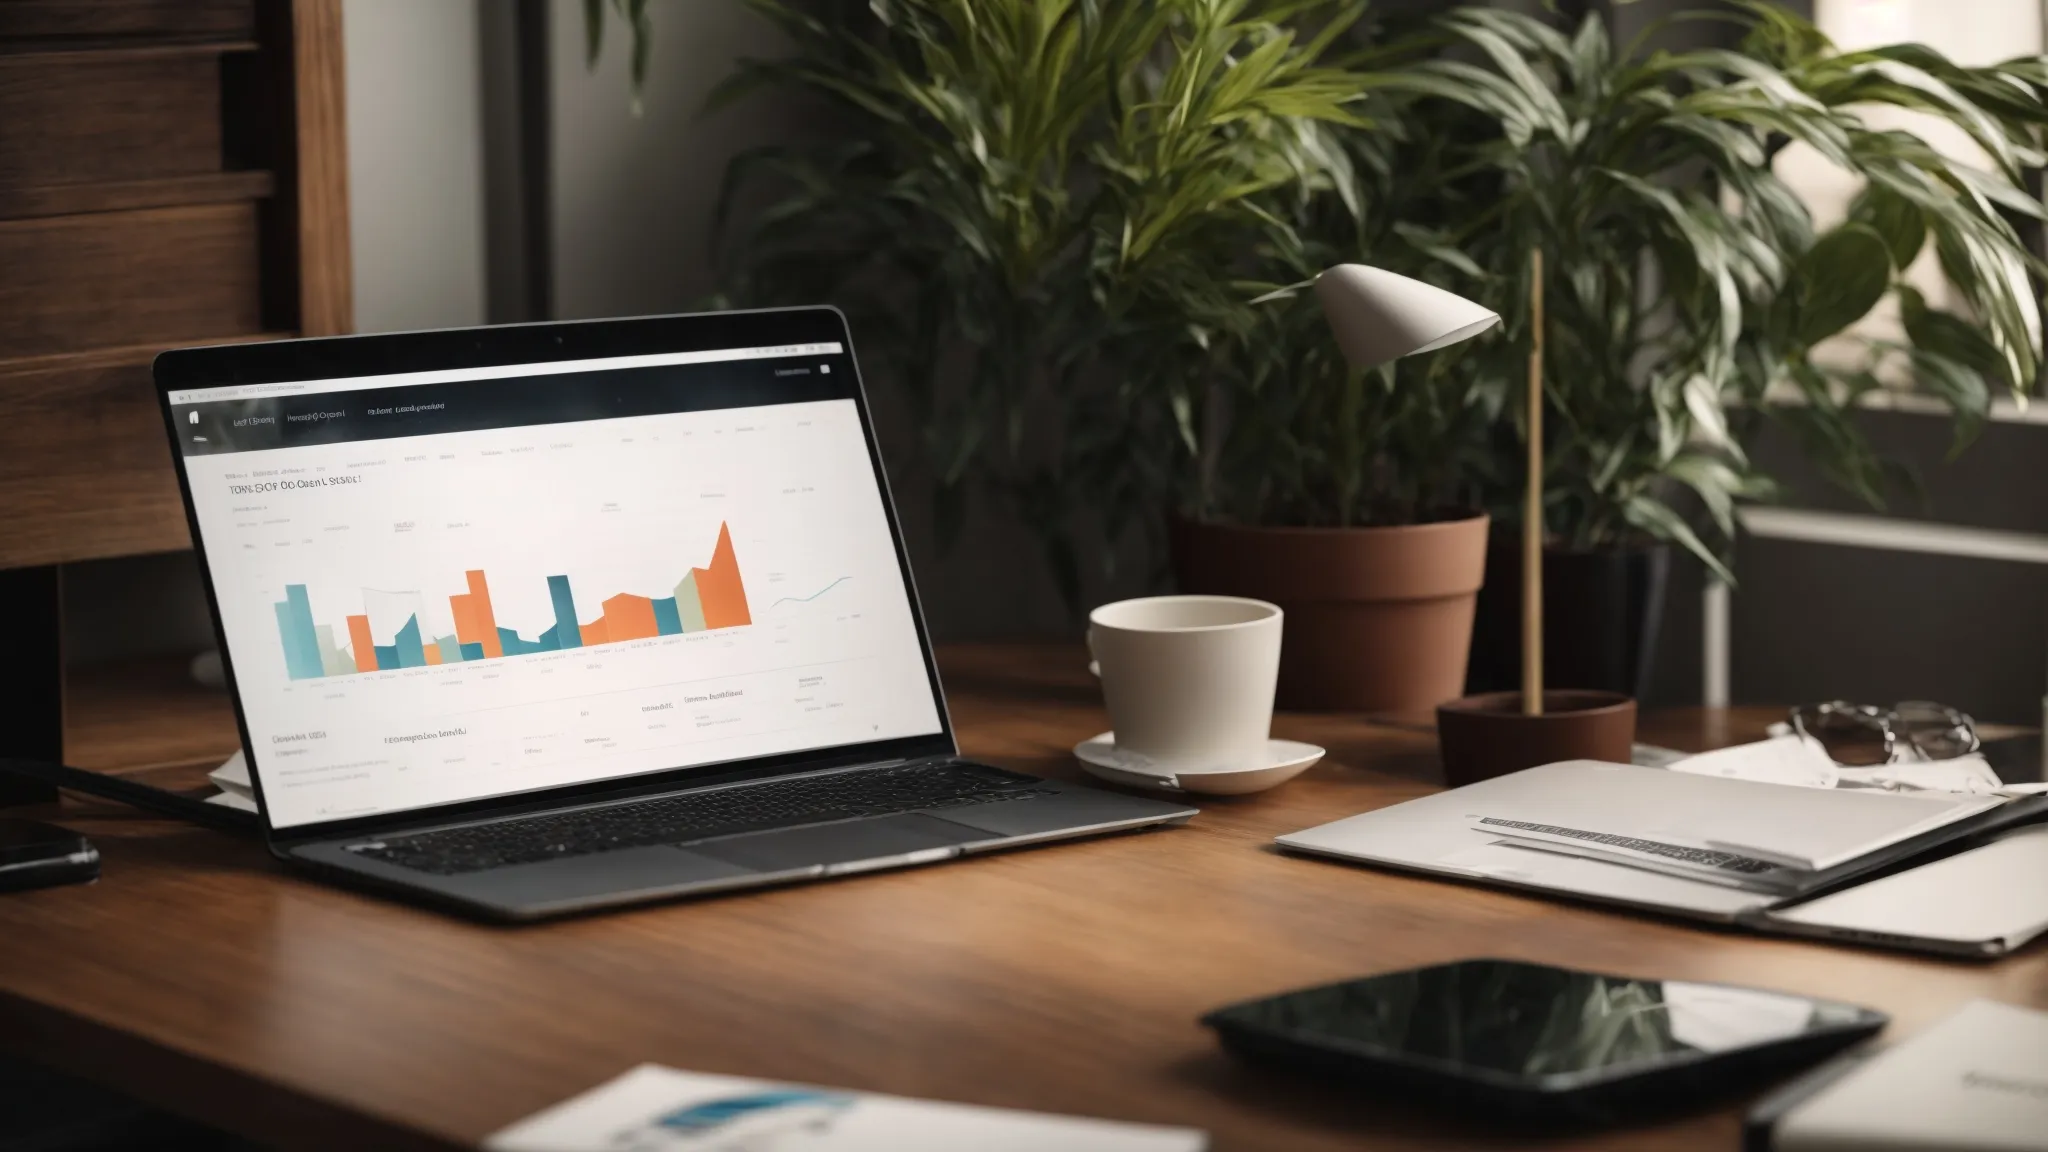 a laptop with graphs on the screen placed on a desk next to a potted plant, representing a professional setting for an seo case study for bedly.